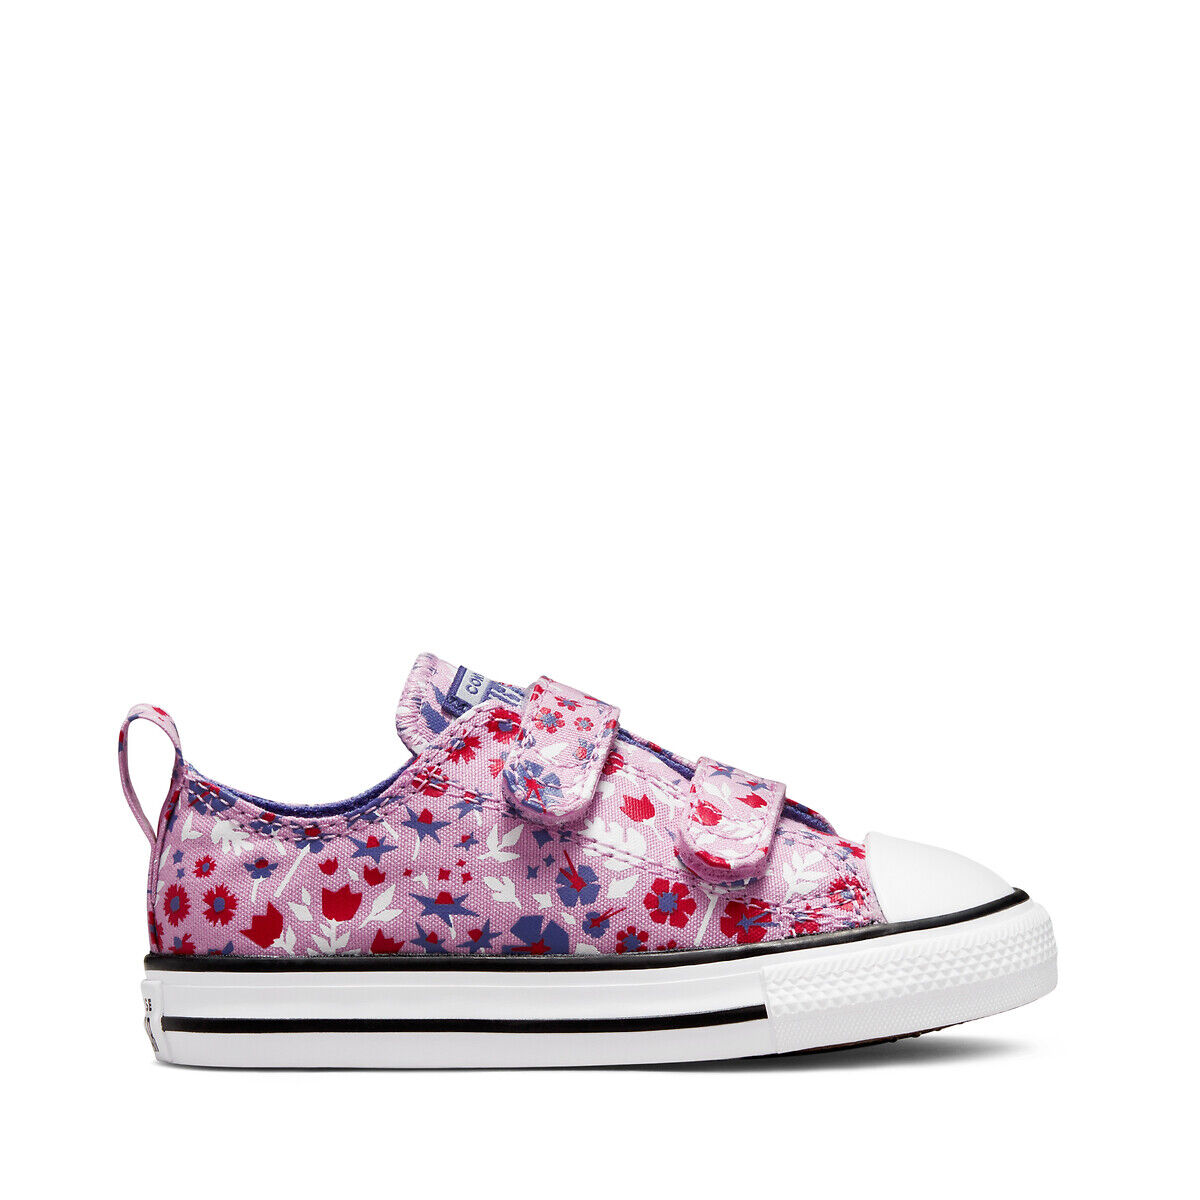 CONVERSE Sneakers Chuck Taylor All Star 2V Paper Floral VIOLETT